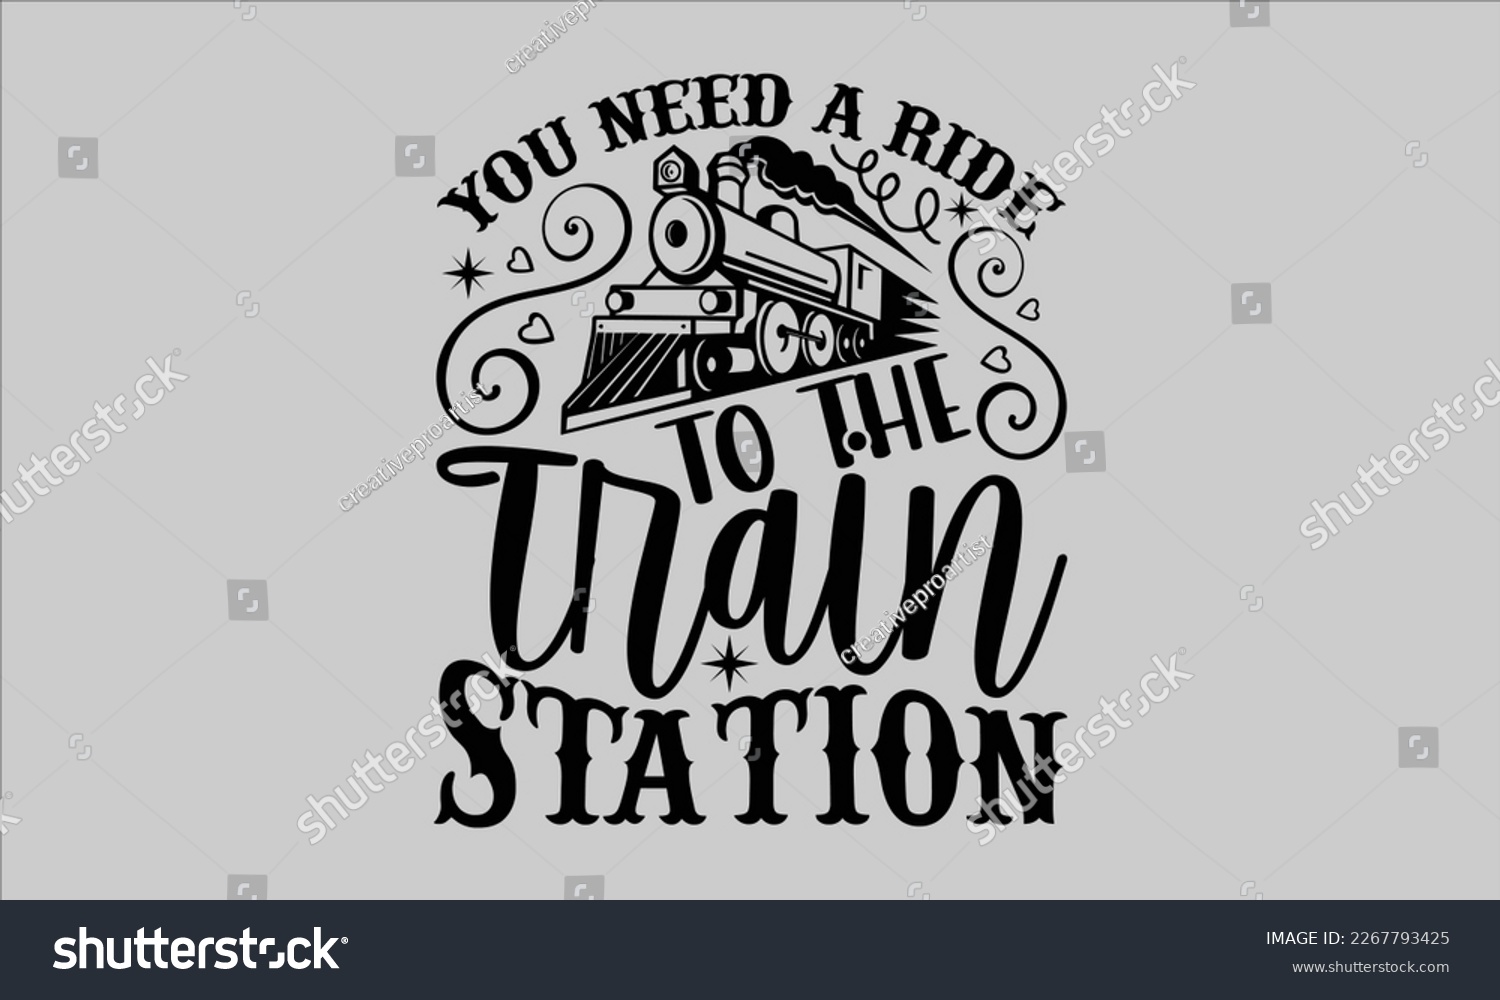 SVG of You need a ride to the train station- Train t-shirt and svg design, Calligraphy graphic design, Hand drew lettering phrases, white background For stickers, templet, mugs, etc. eps 10 svg